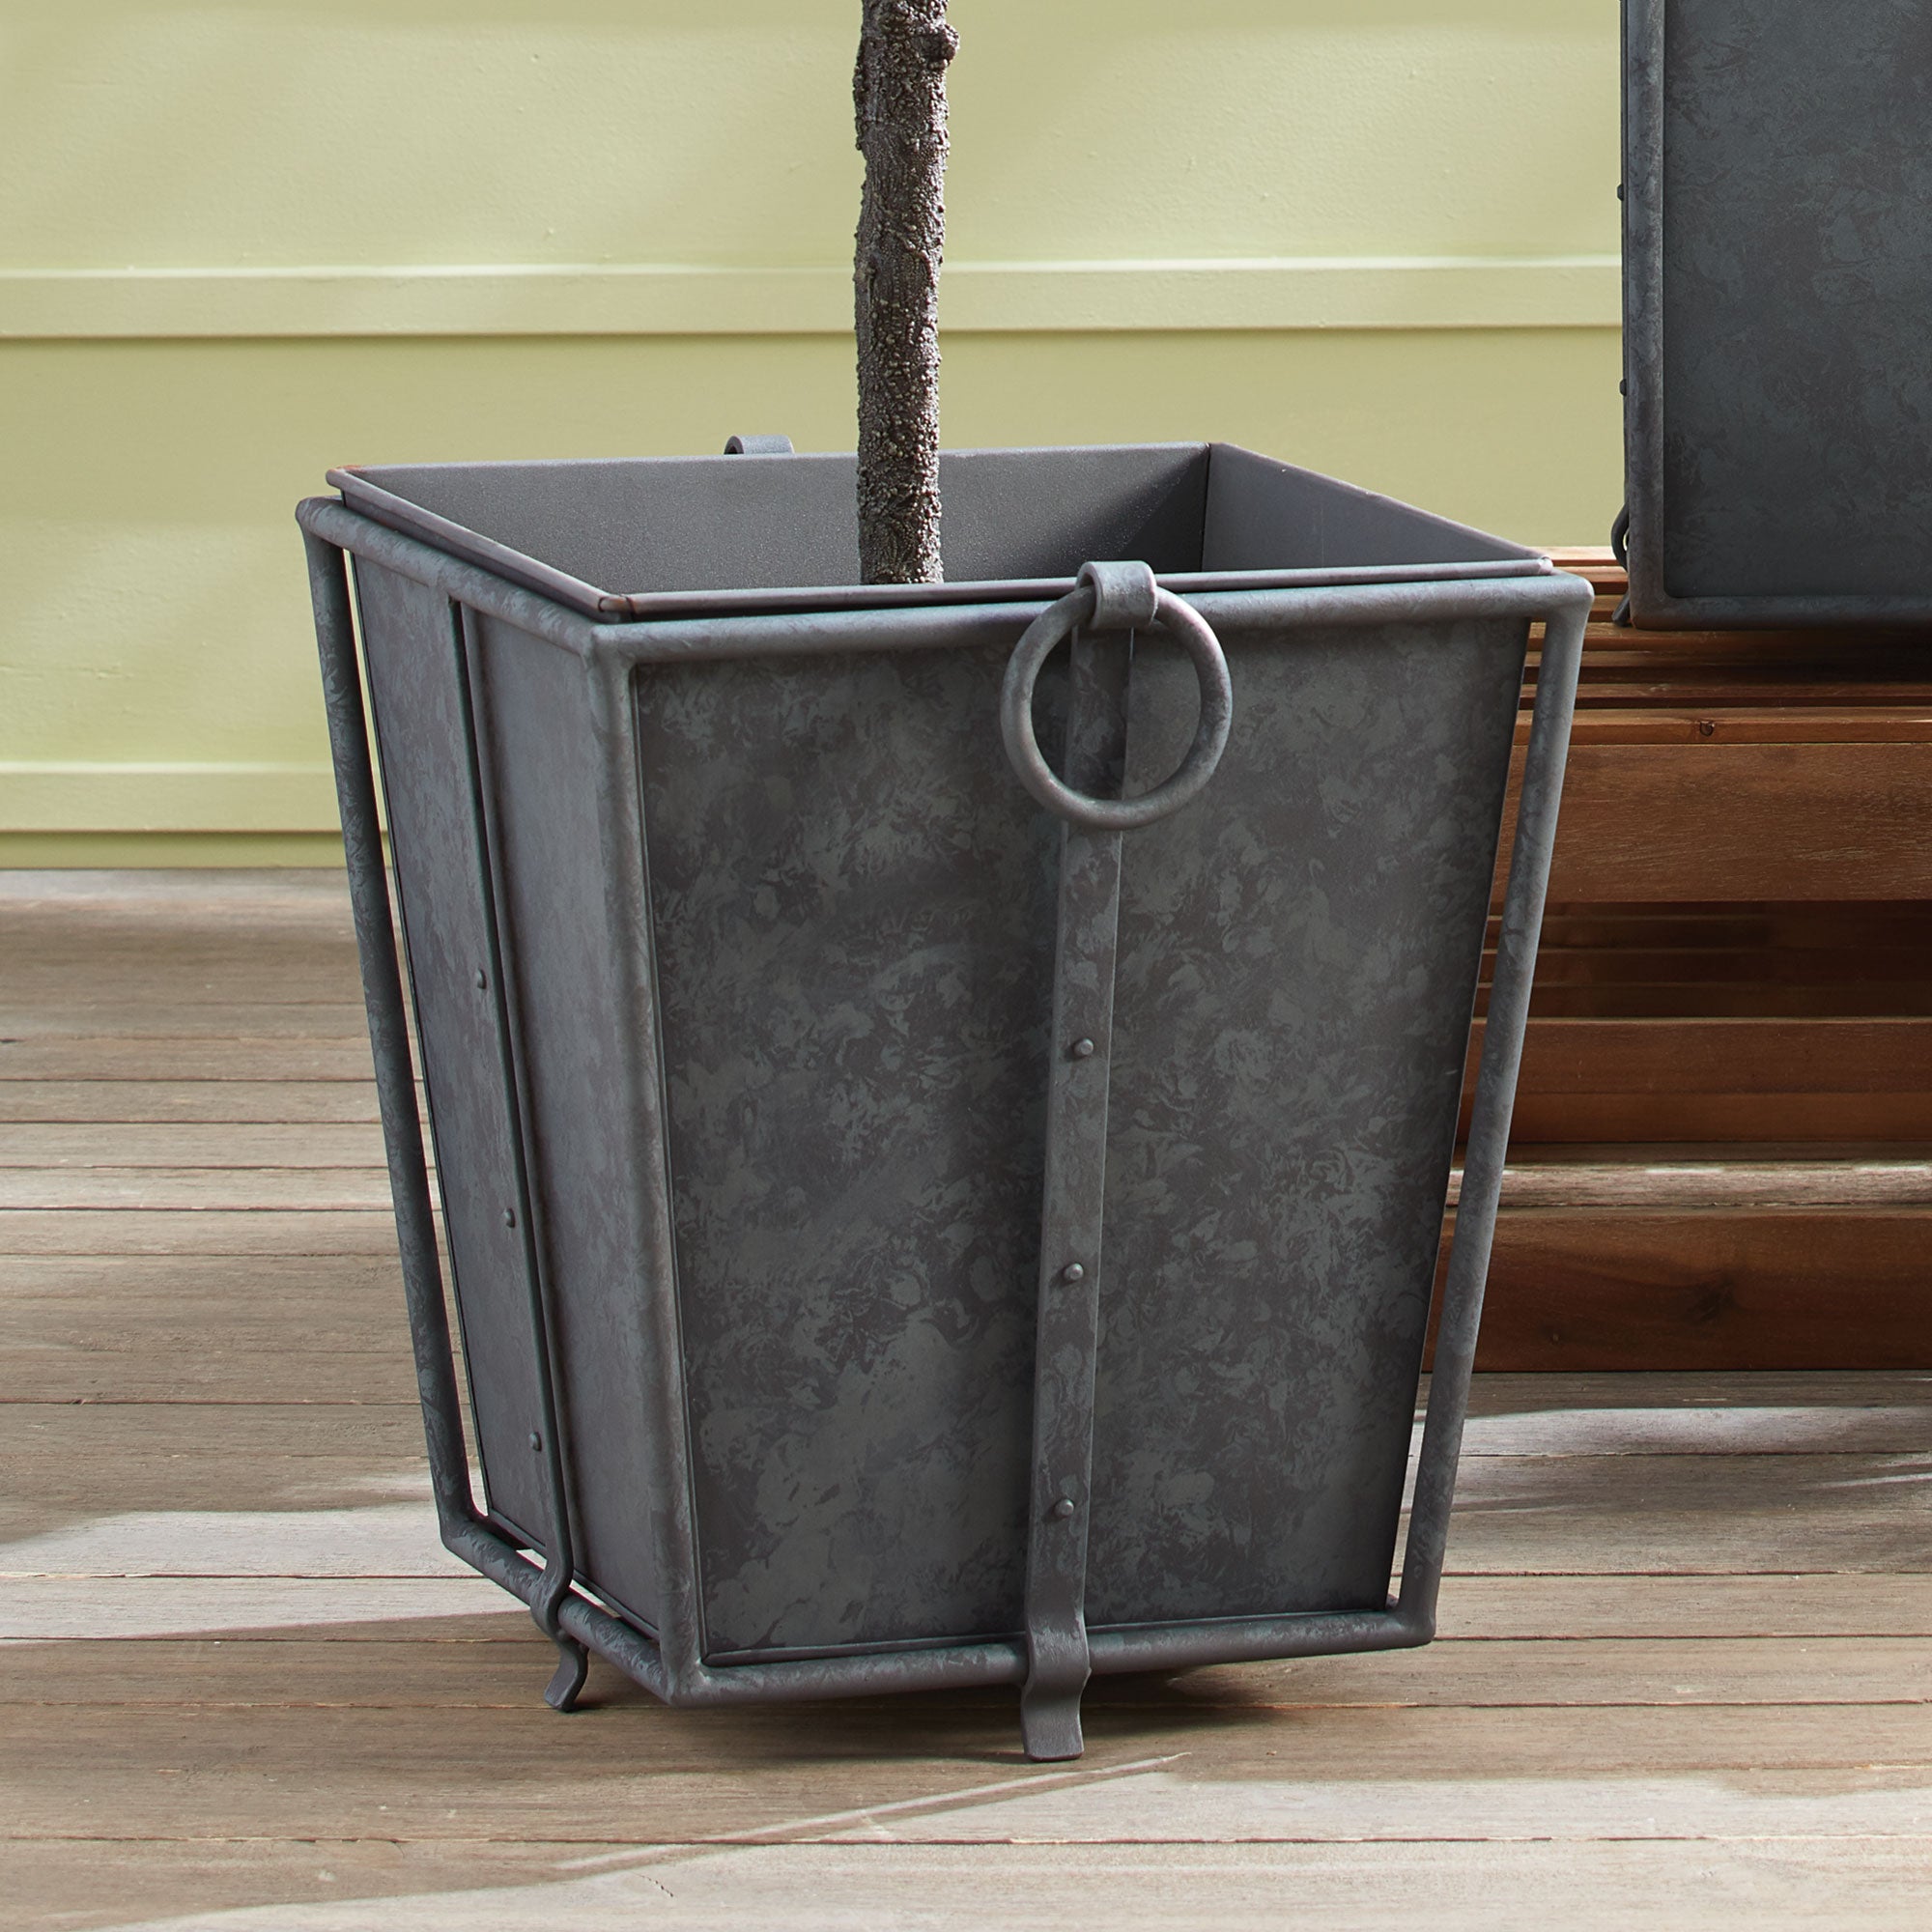 With metal liners that easily slide out, the Callahan Tapered Planter is as practical as it is handsome. The rounded handles and traditional design make it an outdoor classic. Amethyst Home provides interior design, new construction, custom furniture, and area rugs in the Park City metro area.